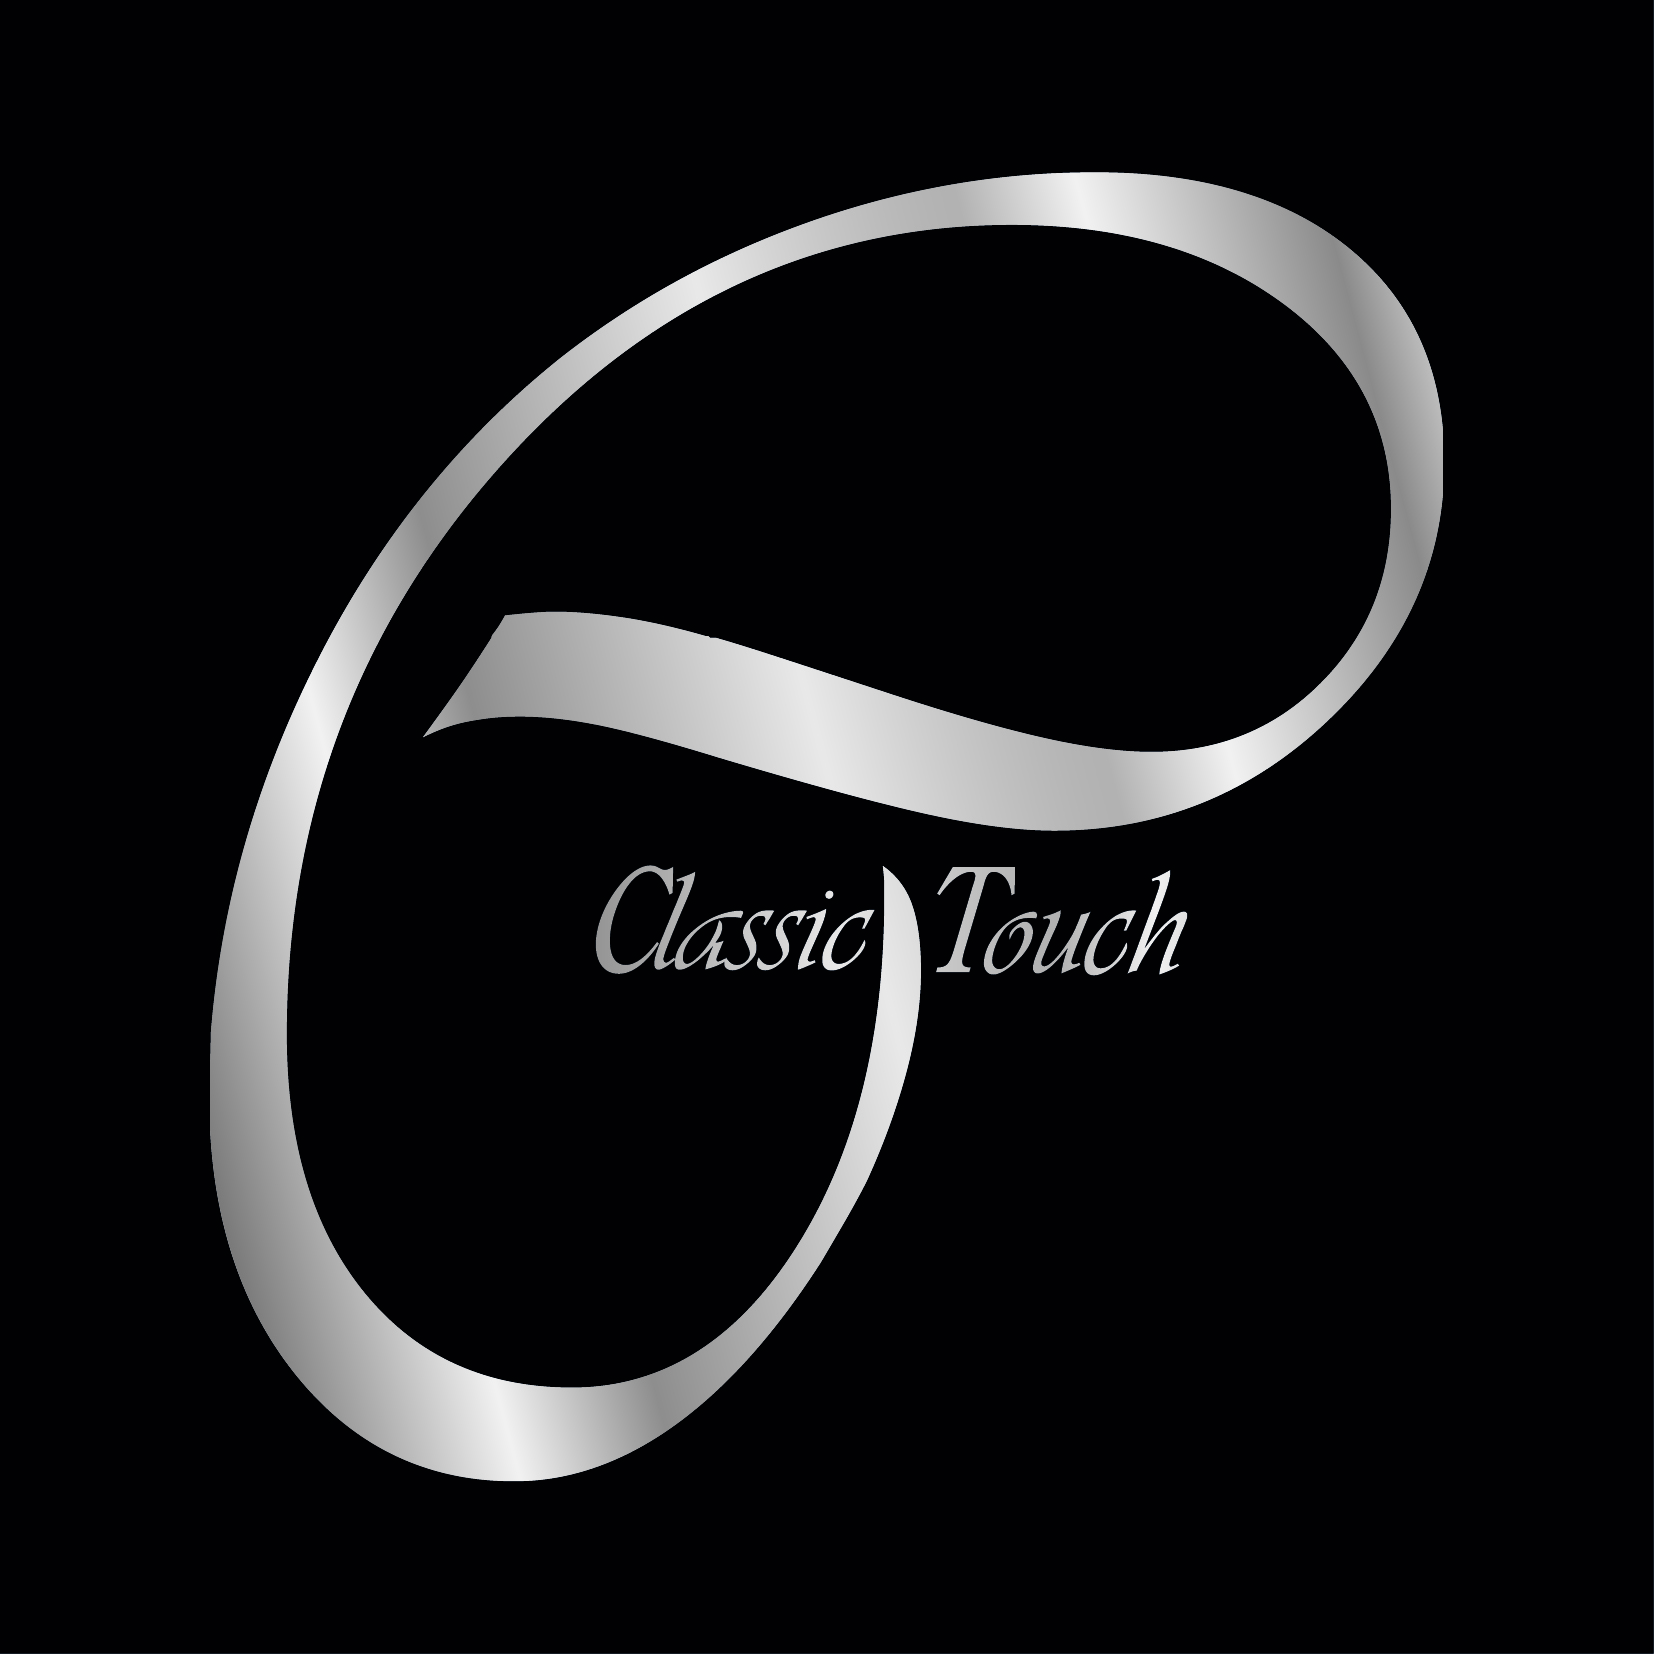 Classic Touch Nail and Beauty Salon